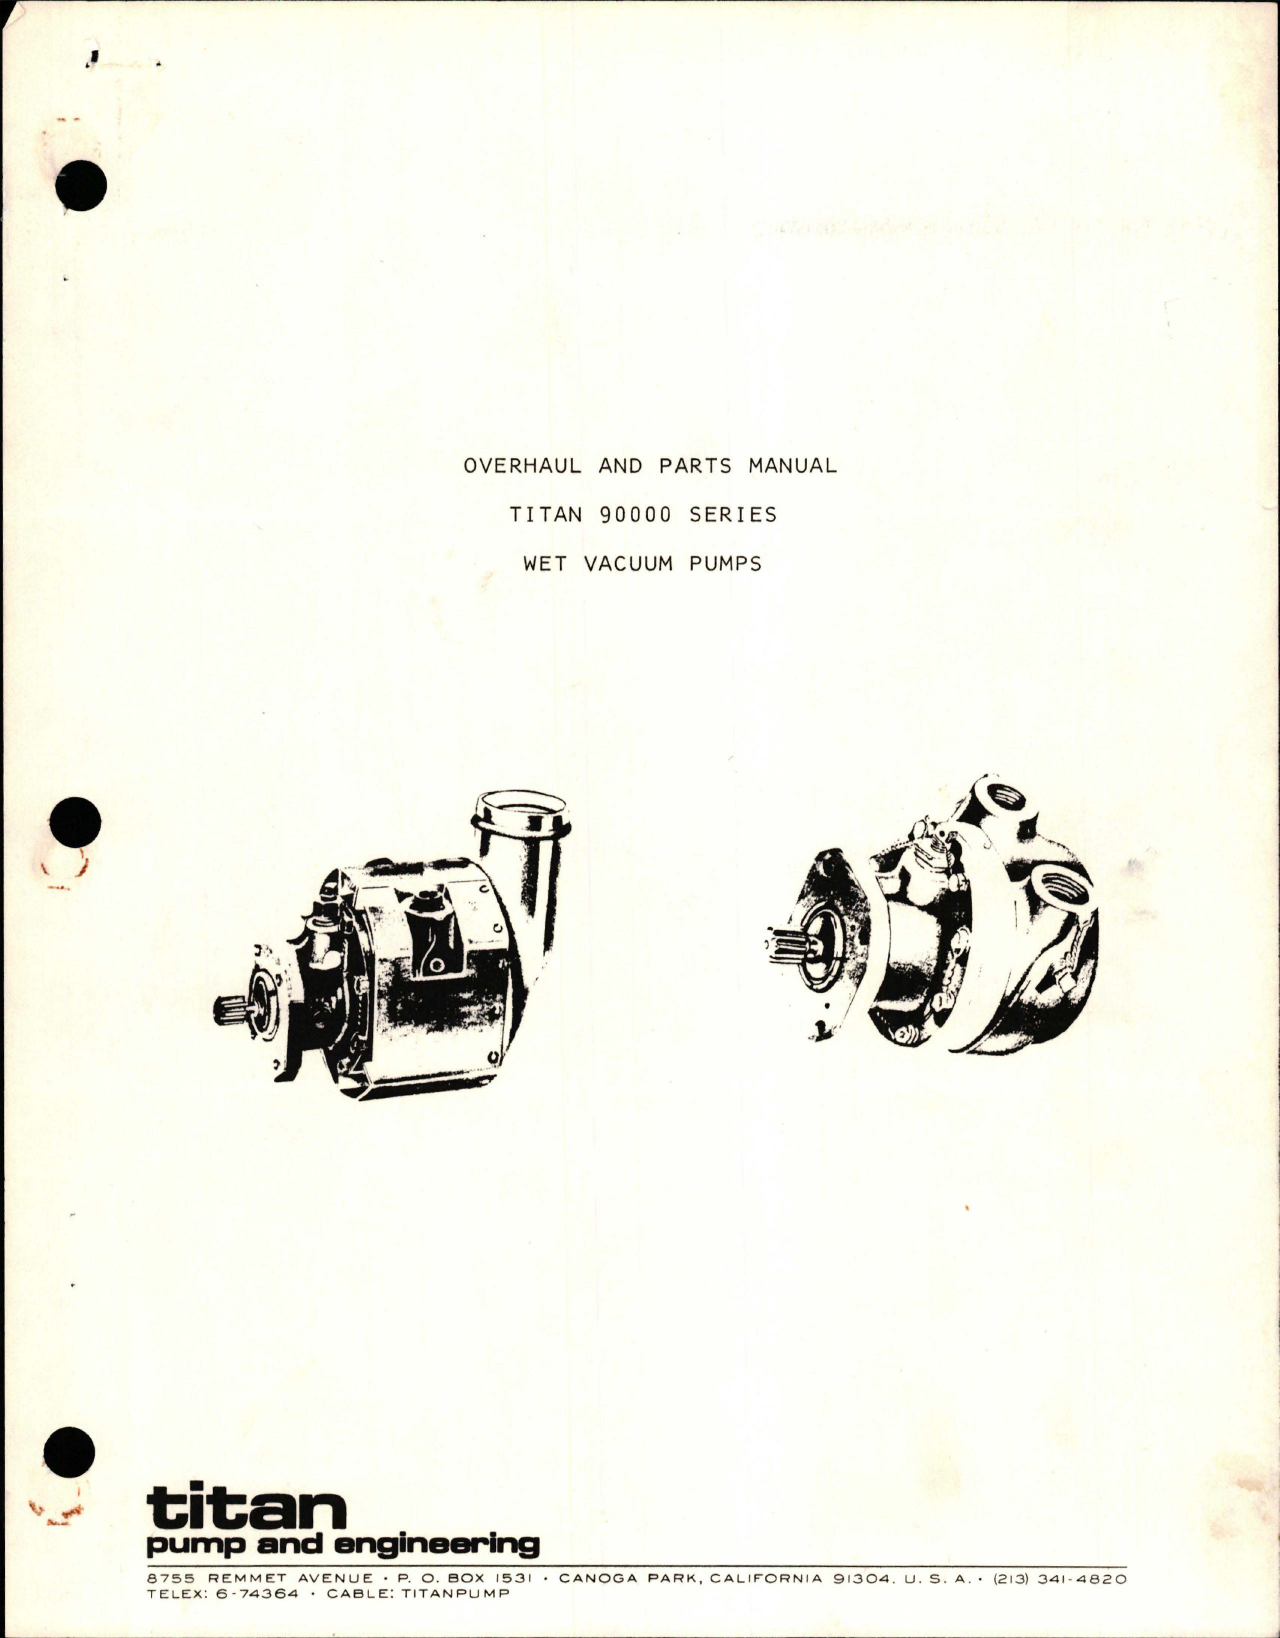 Sample page 1 from AirCorps Library document: Overhaul and Parts Manual for Wet Vacuum Pumps - 90000 Series